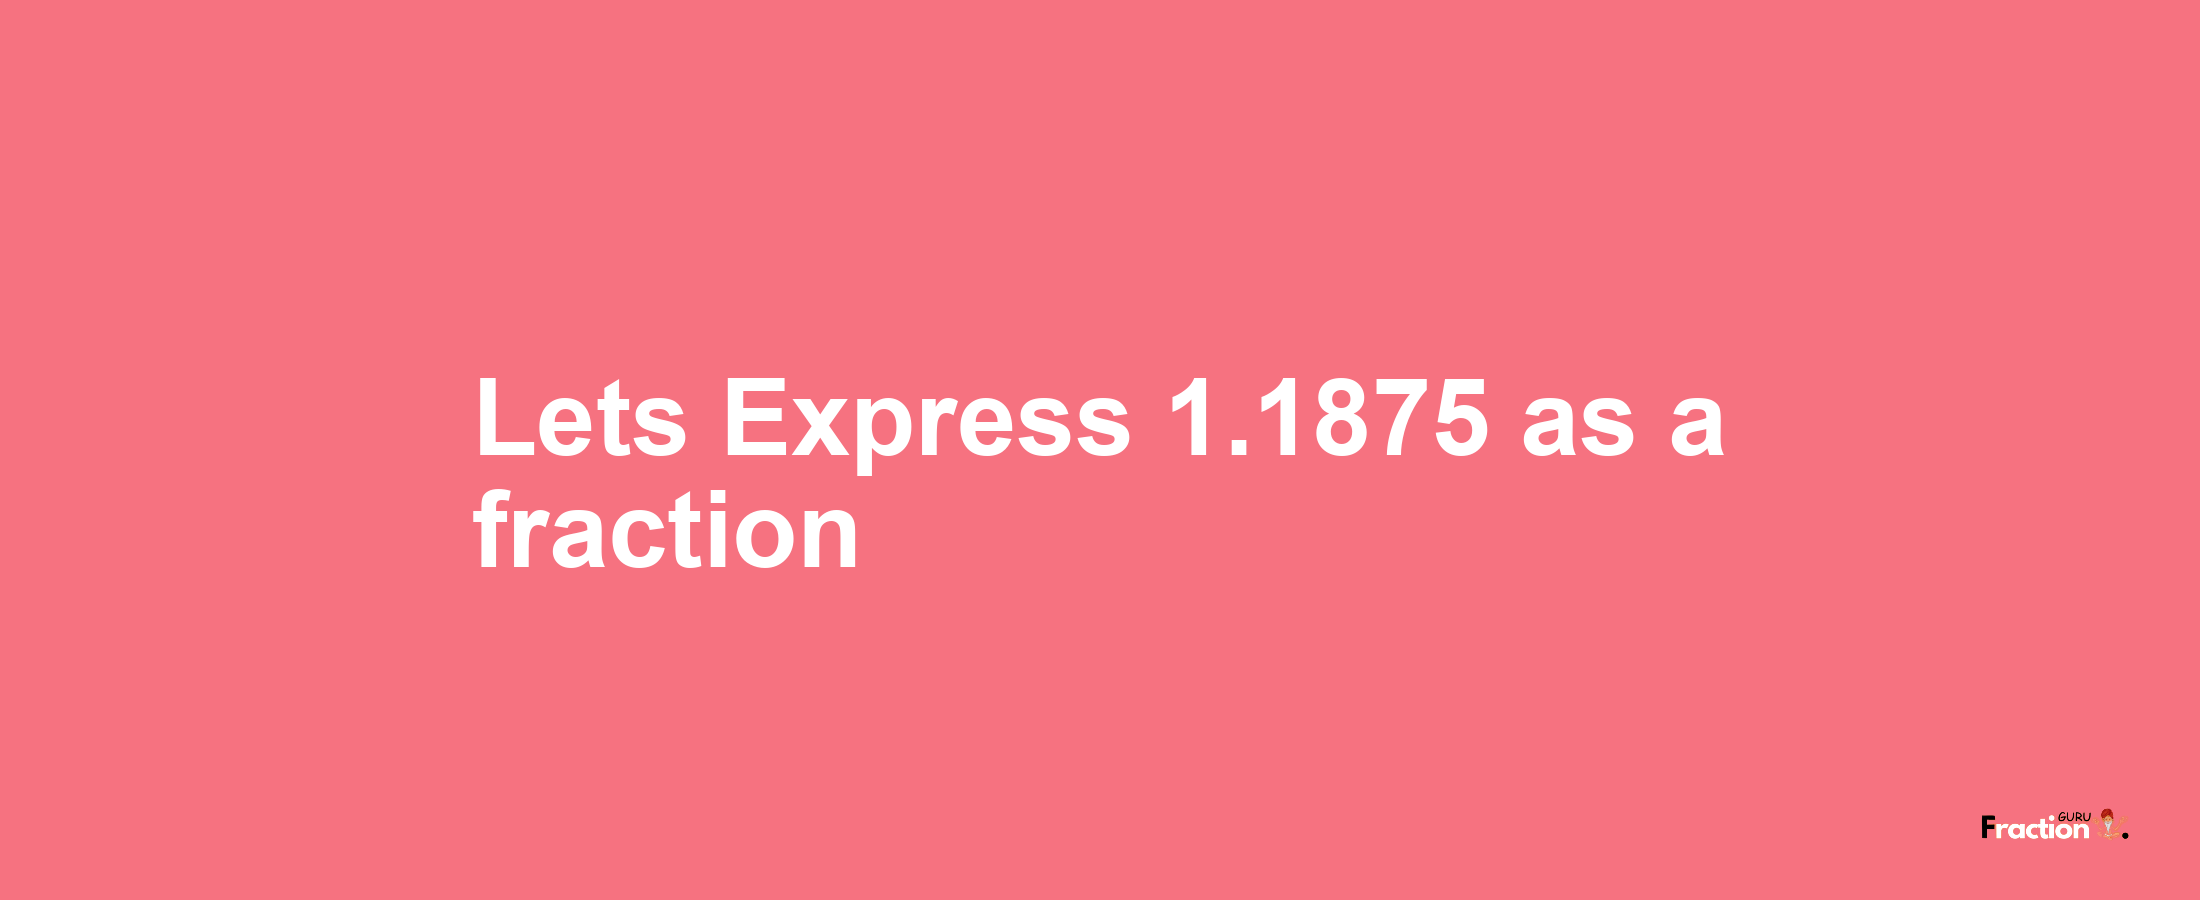 Lets Express 1.1875 as afraction